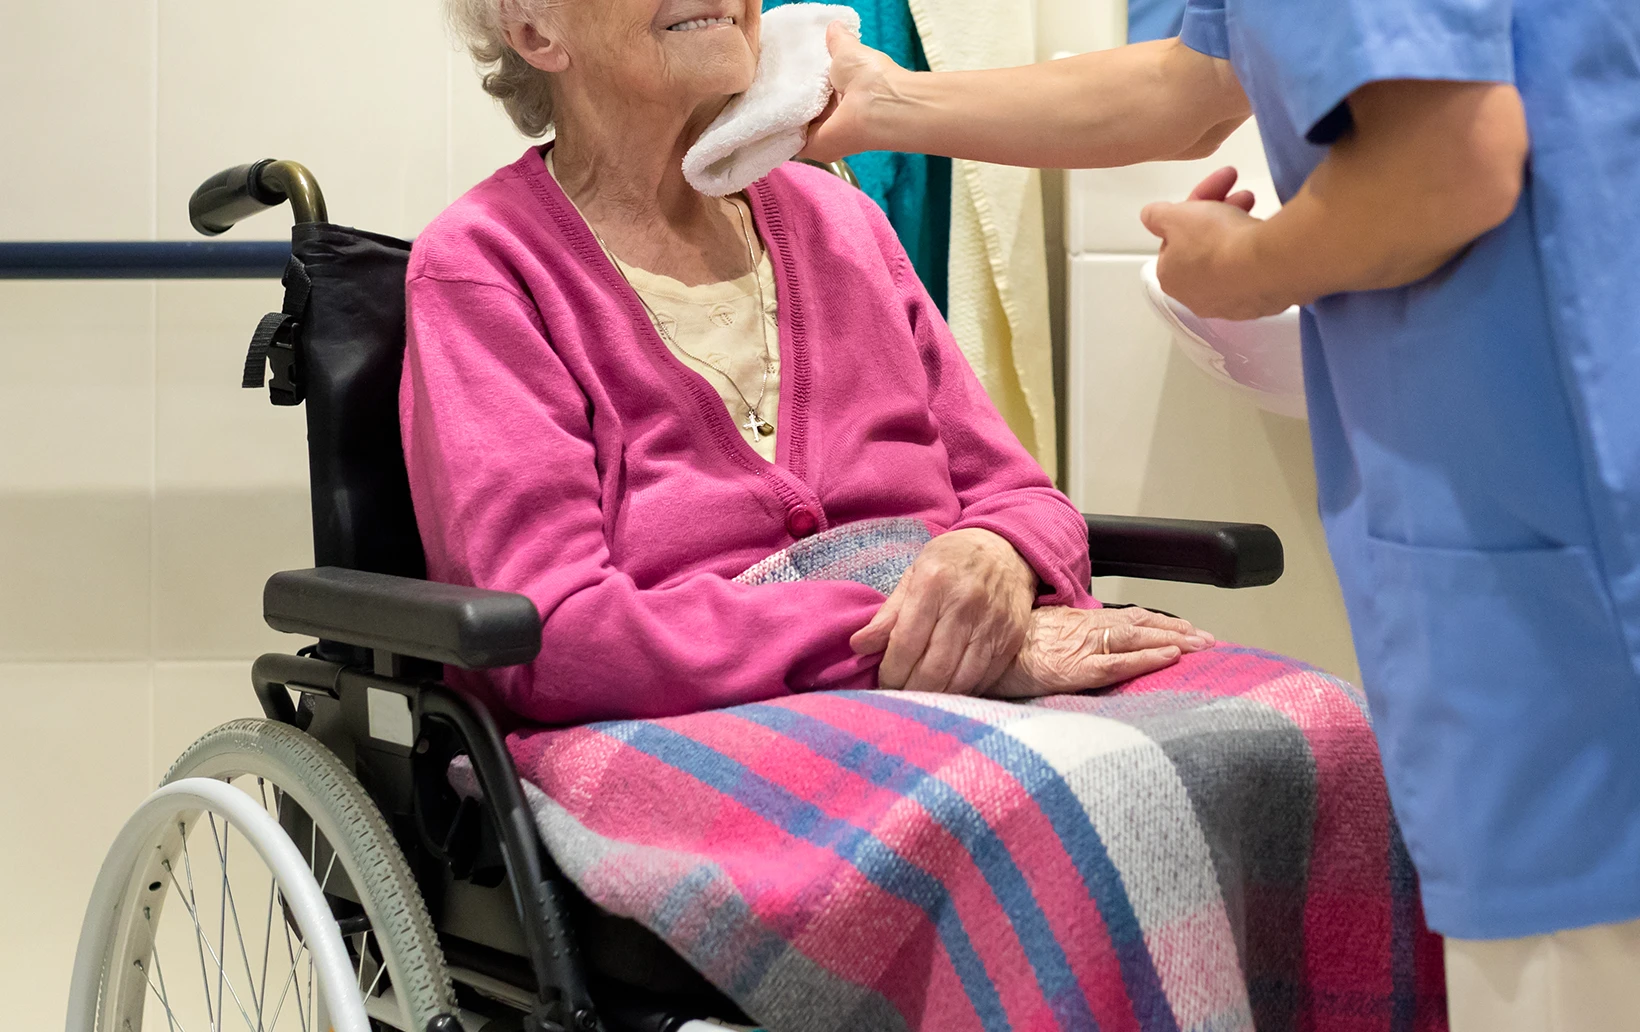 home care services london, overnight care, professional healthcare assistants